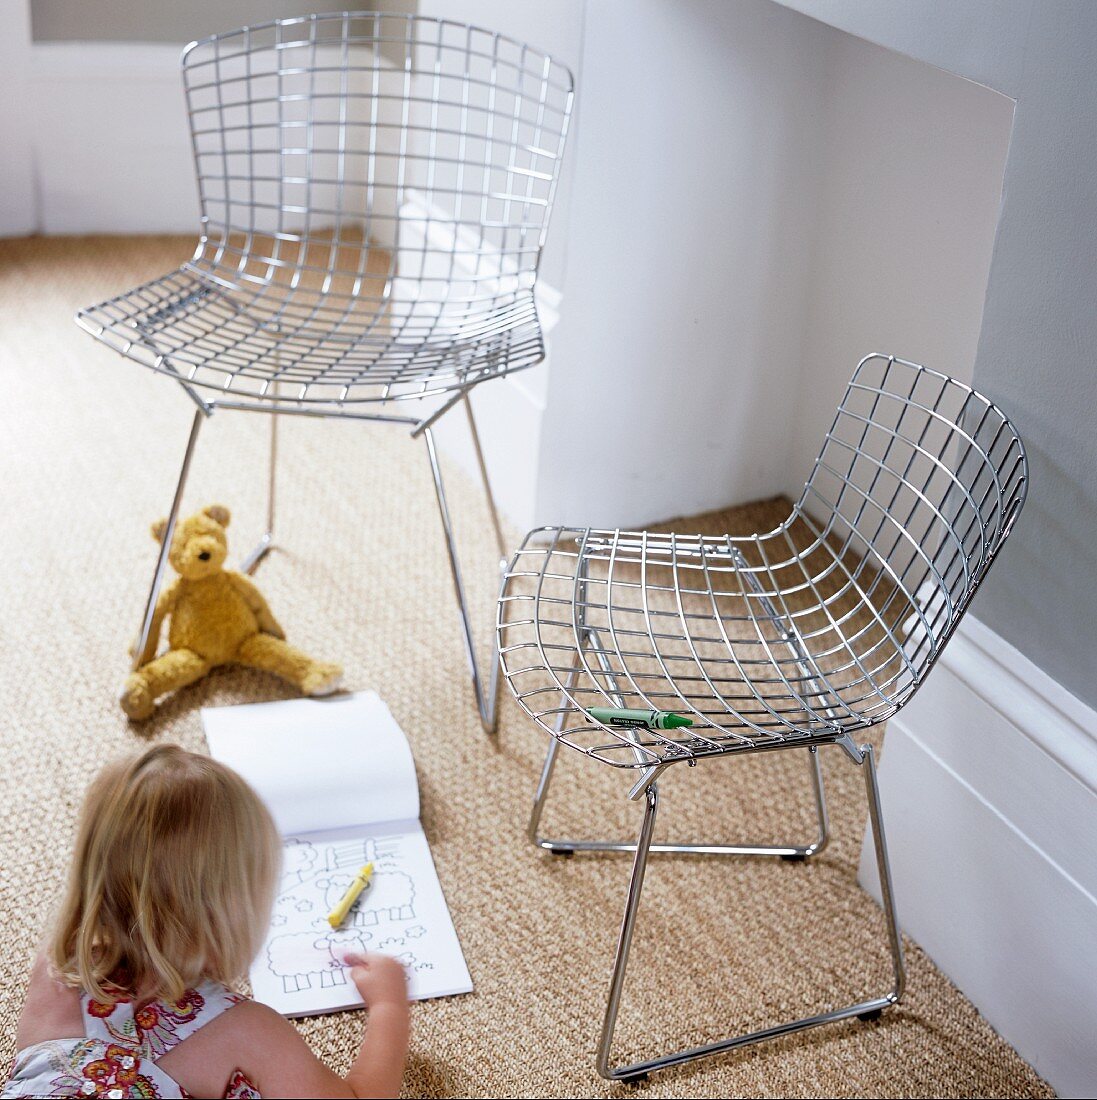 A pair wire mesh chairs and little girl drawing on the carpet